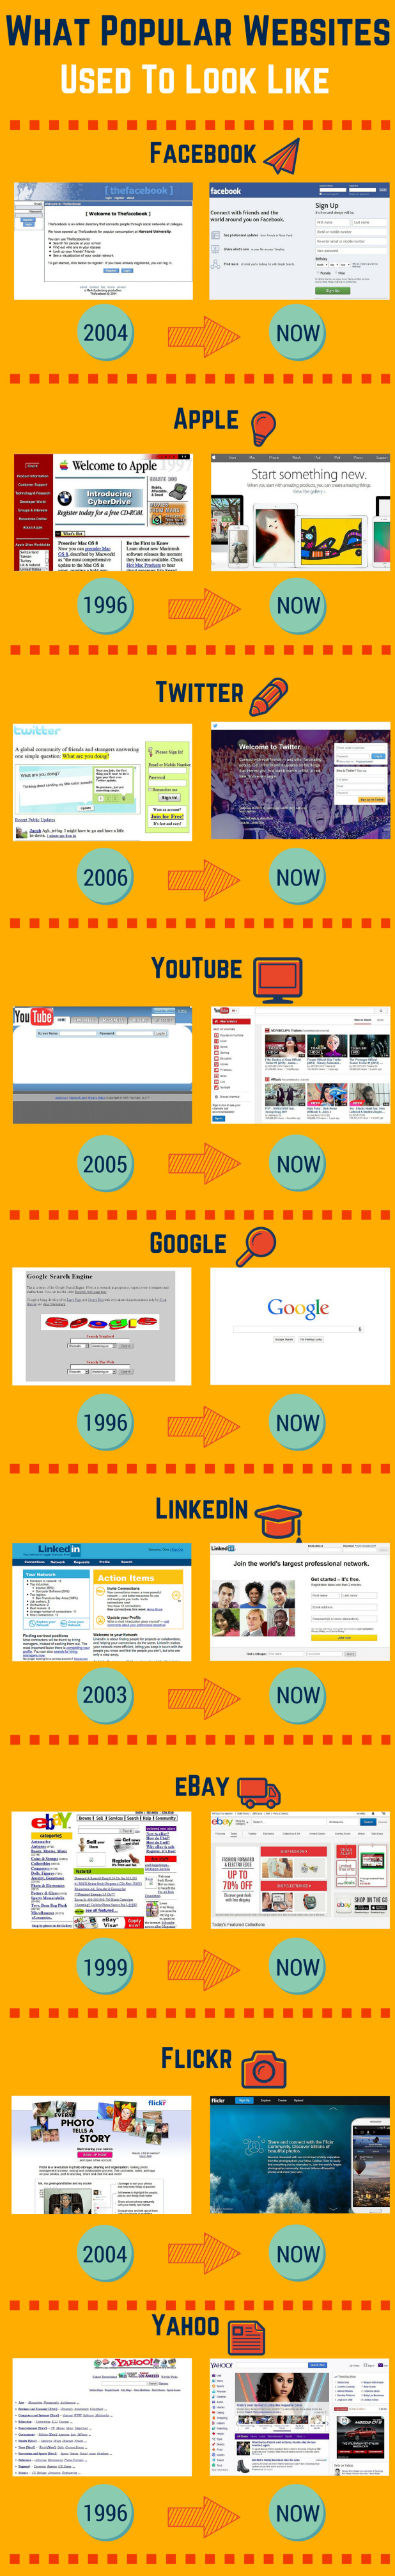 What popular websites used to look like